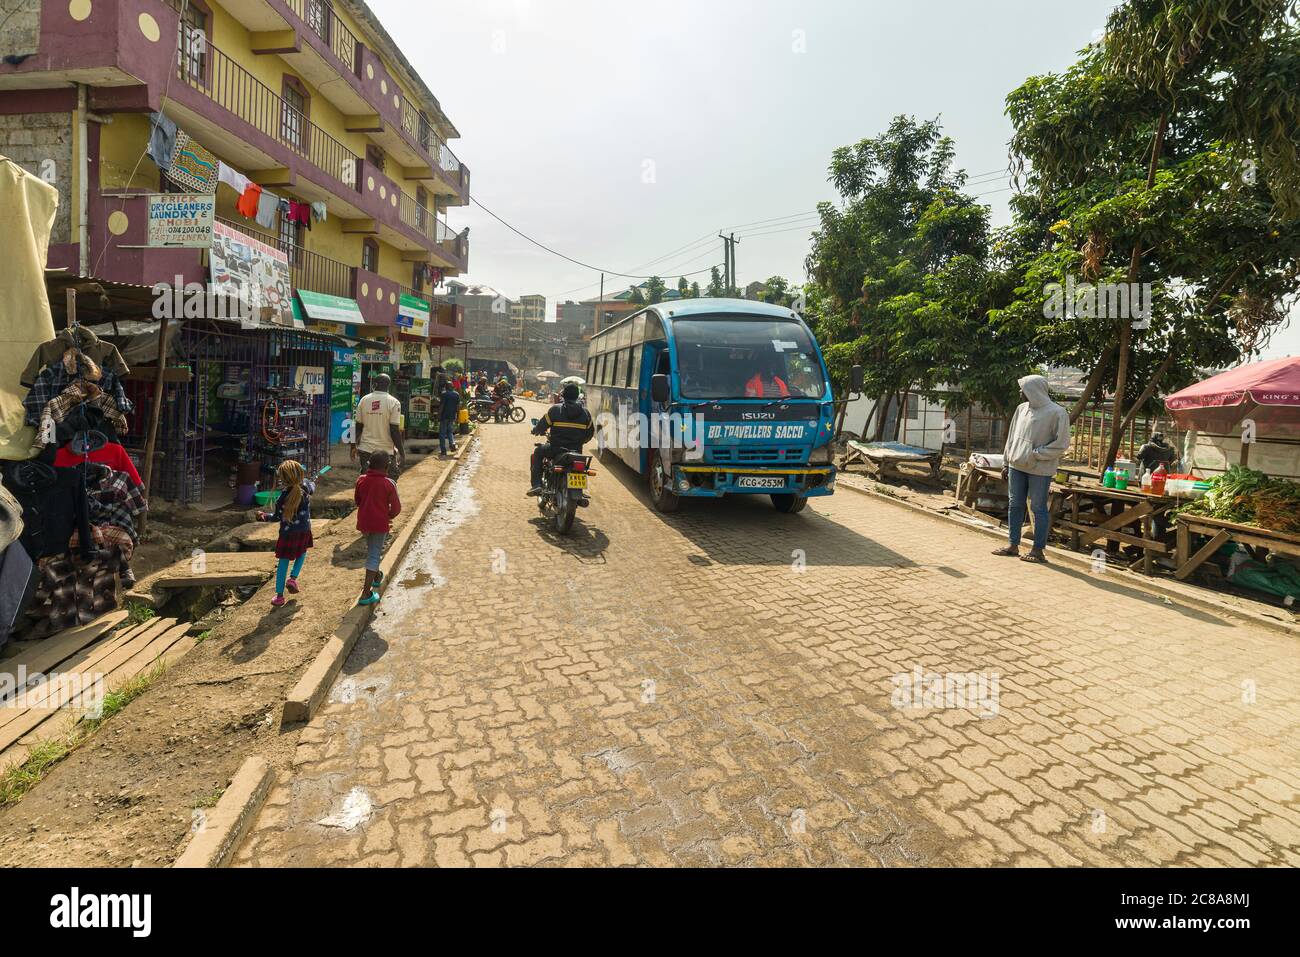 A bus and motorbike drive down a paved road with buildings and people either side, Korogocho, Nairobi, Kenya Stock Photo